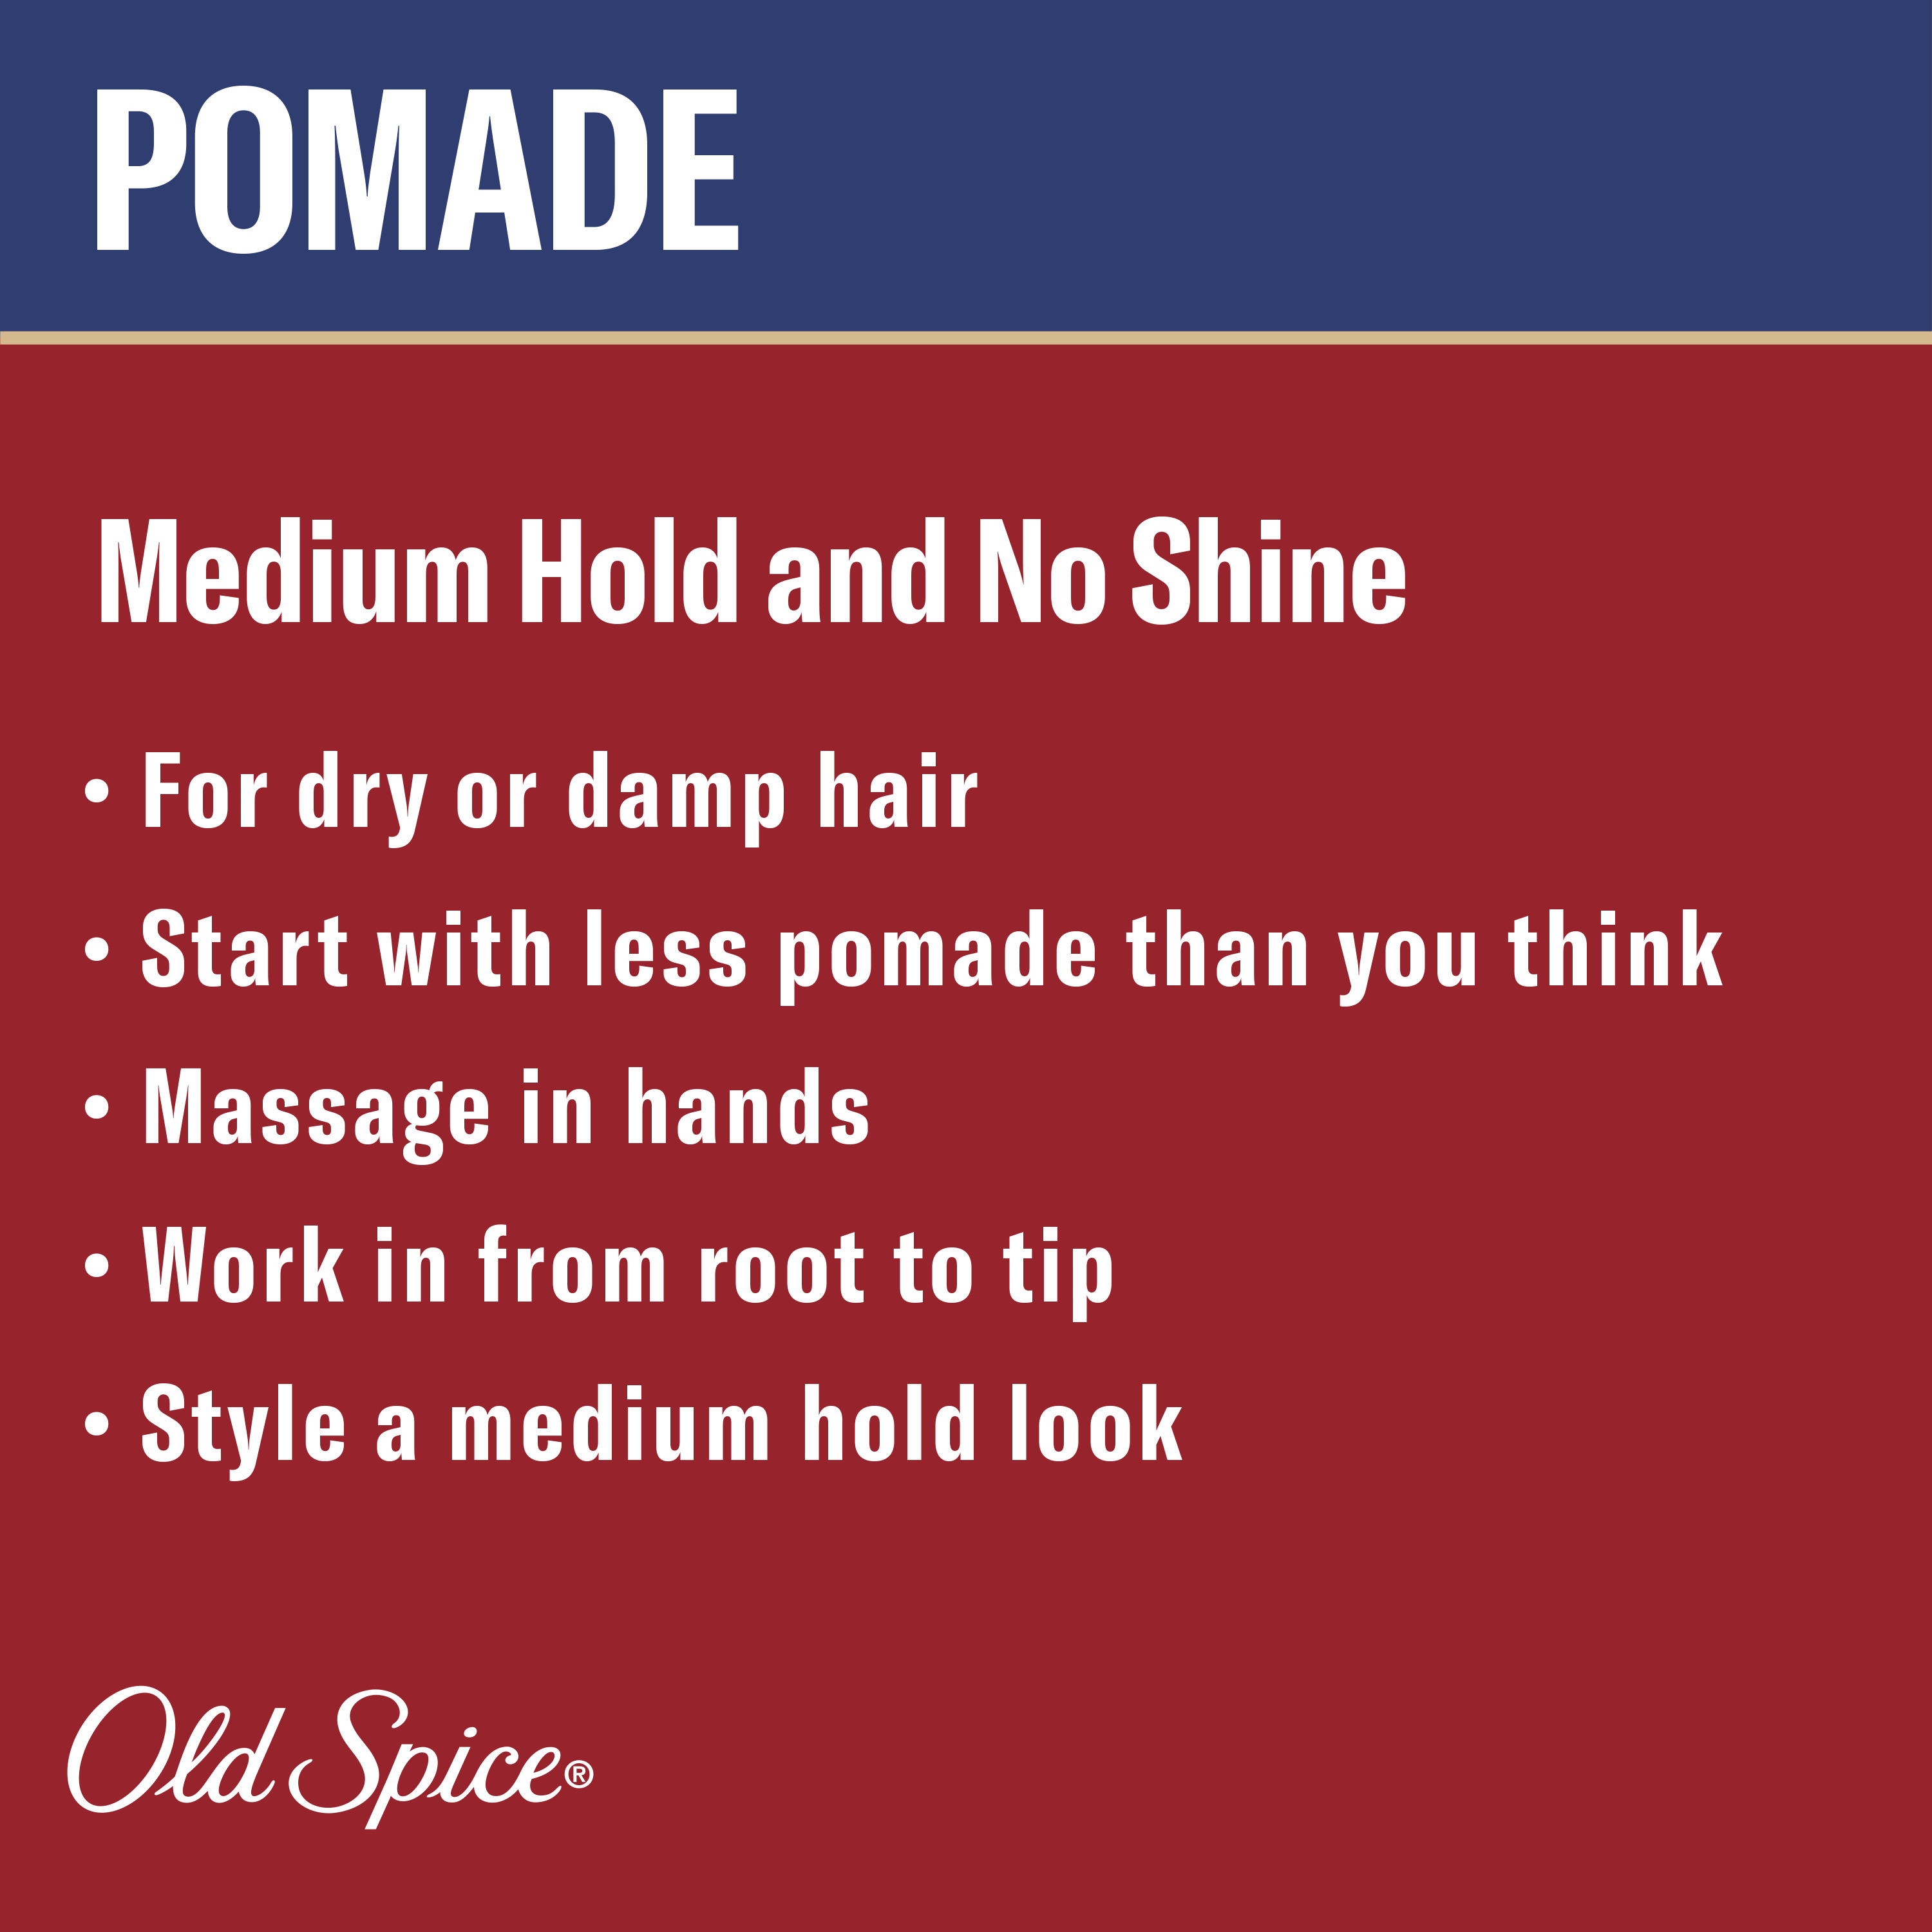 Old Spice Men's Hair Styling Pomade, All Hair Types, Matte Finish, Medium Hold, 2.2 oz - image 3 of 11